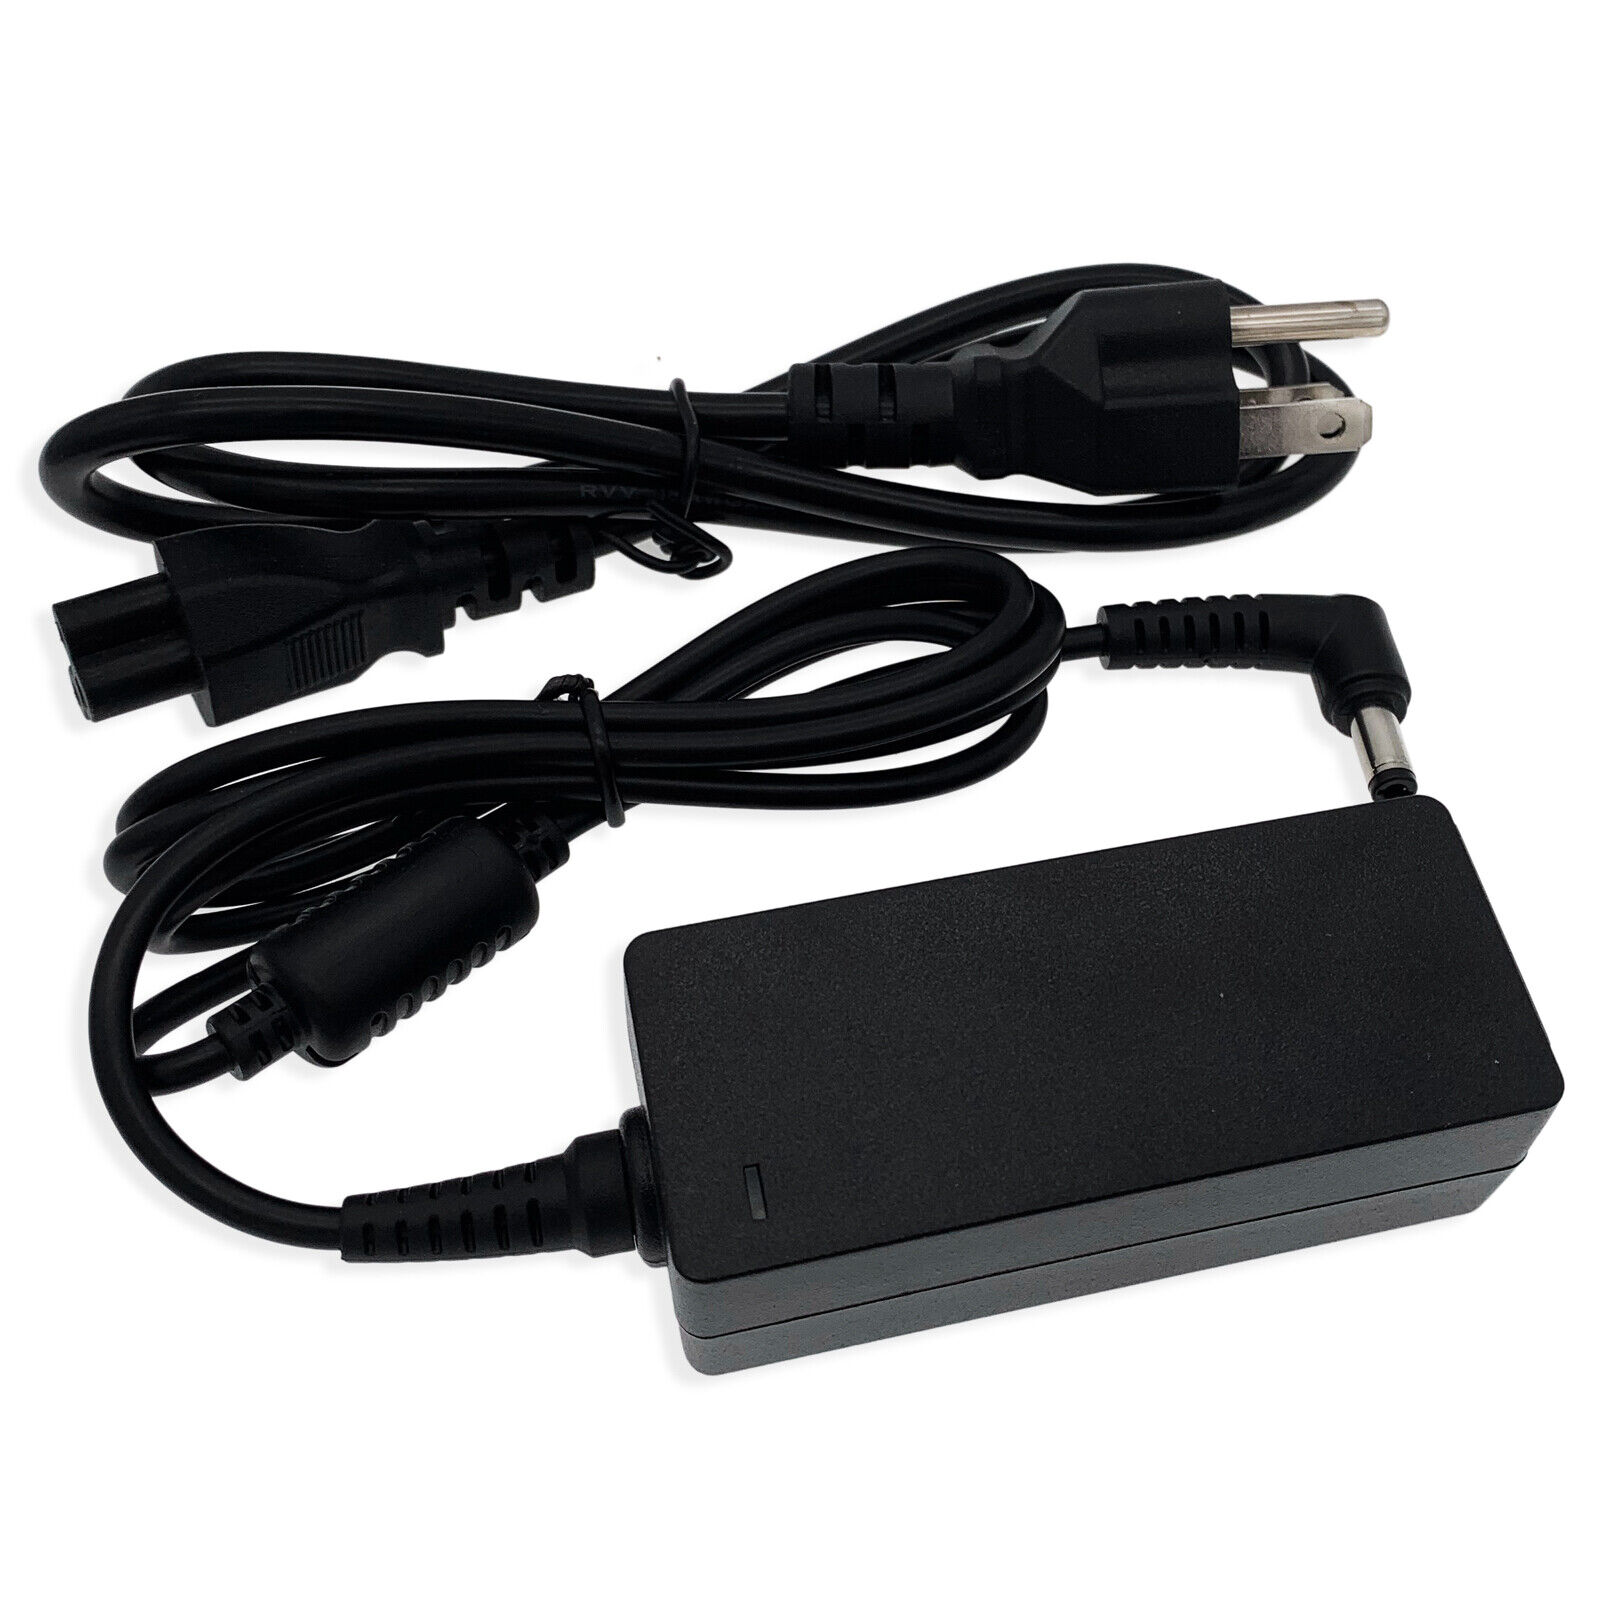 Original 19.5V 6.15A A17-120P1A For Clevo N857HK1 OEM 120W Chicony AC Adapter Compatible Brand For Clevo Bundled Items